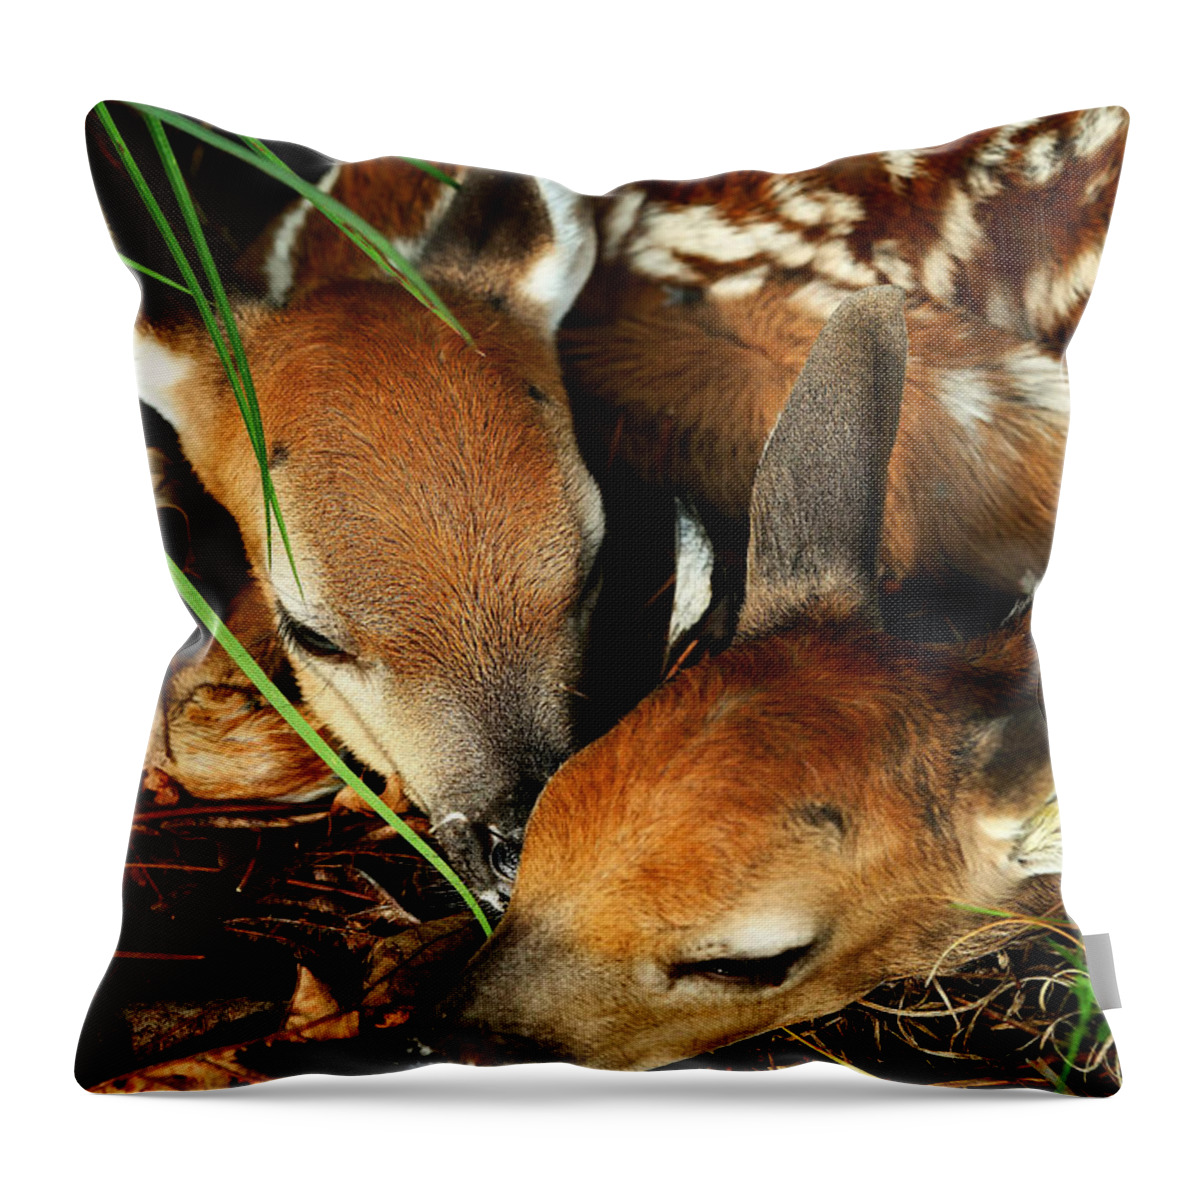 Fawns Throw Pillow featuring the photograph Hiding Twin Whitetail Fawns by Michael Dougherty